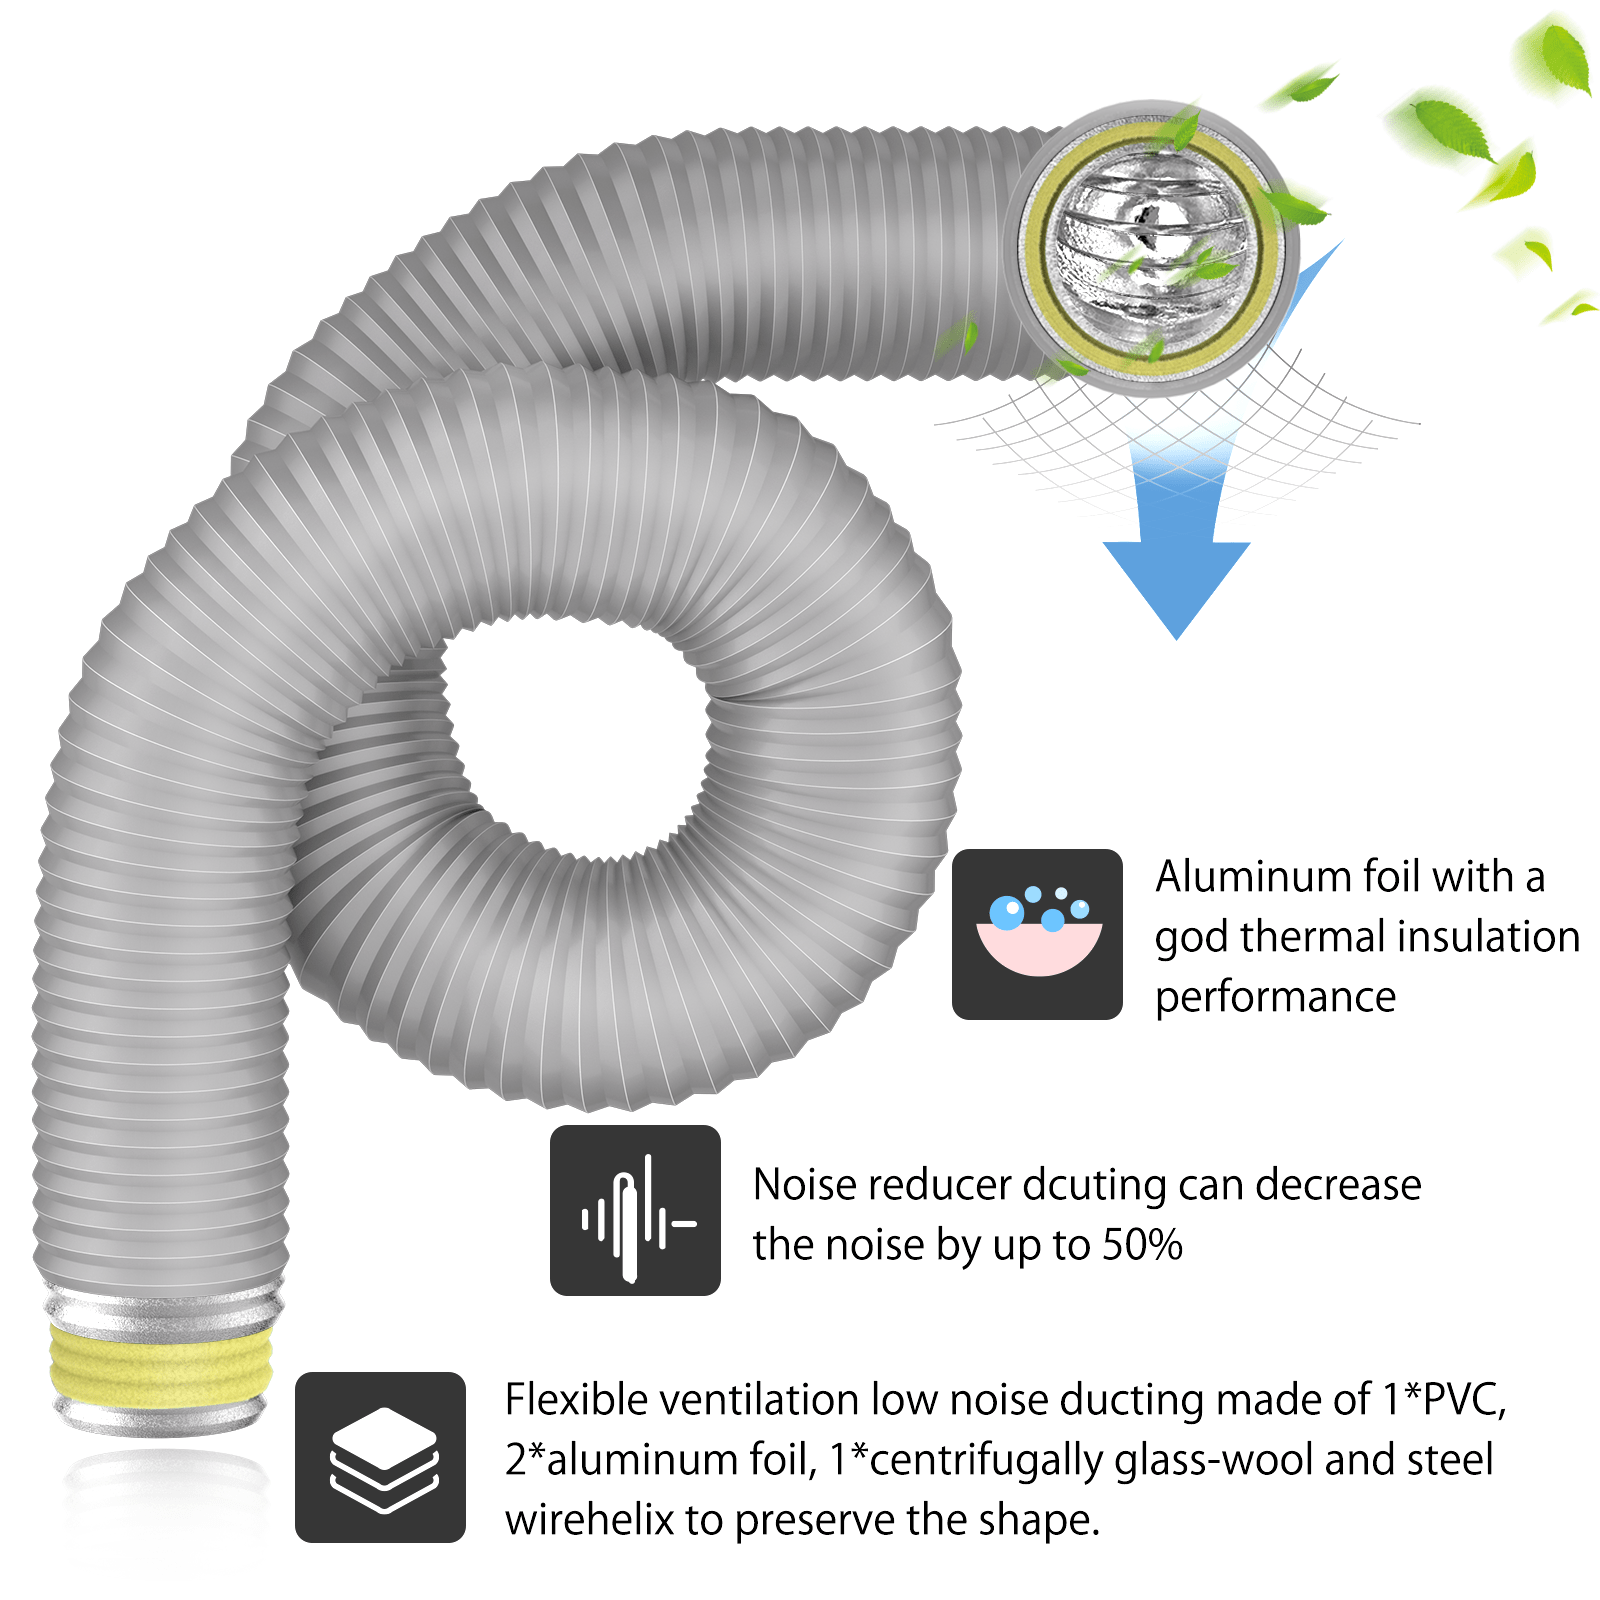 Insulated Flexible Duct Gray Aluminum Foil Noise Reducing Ducting